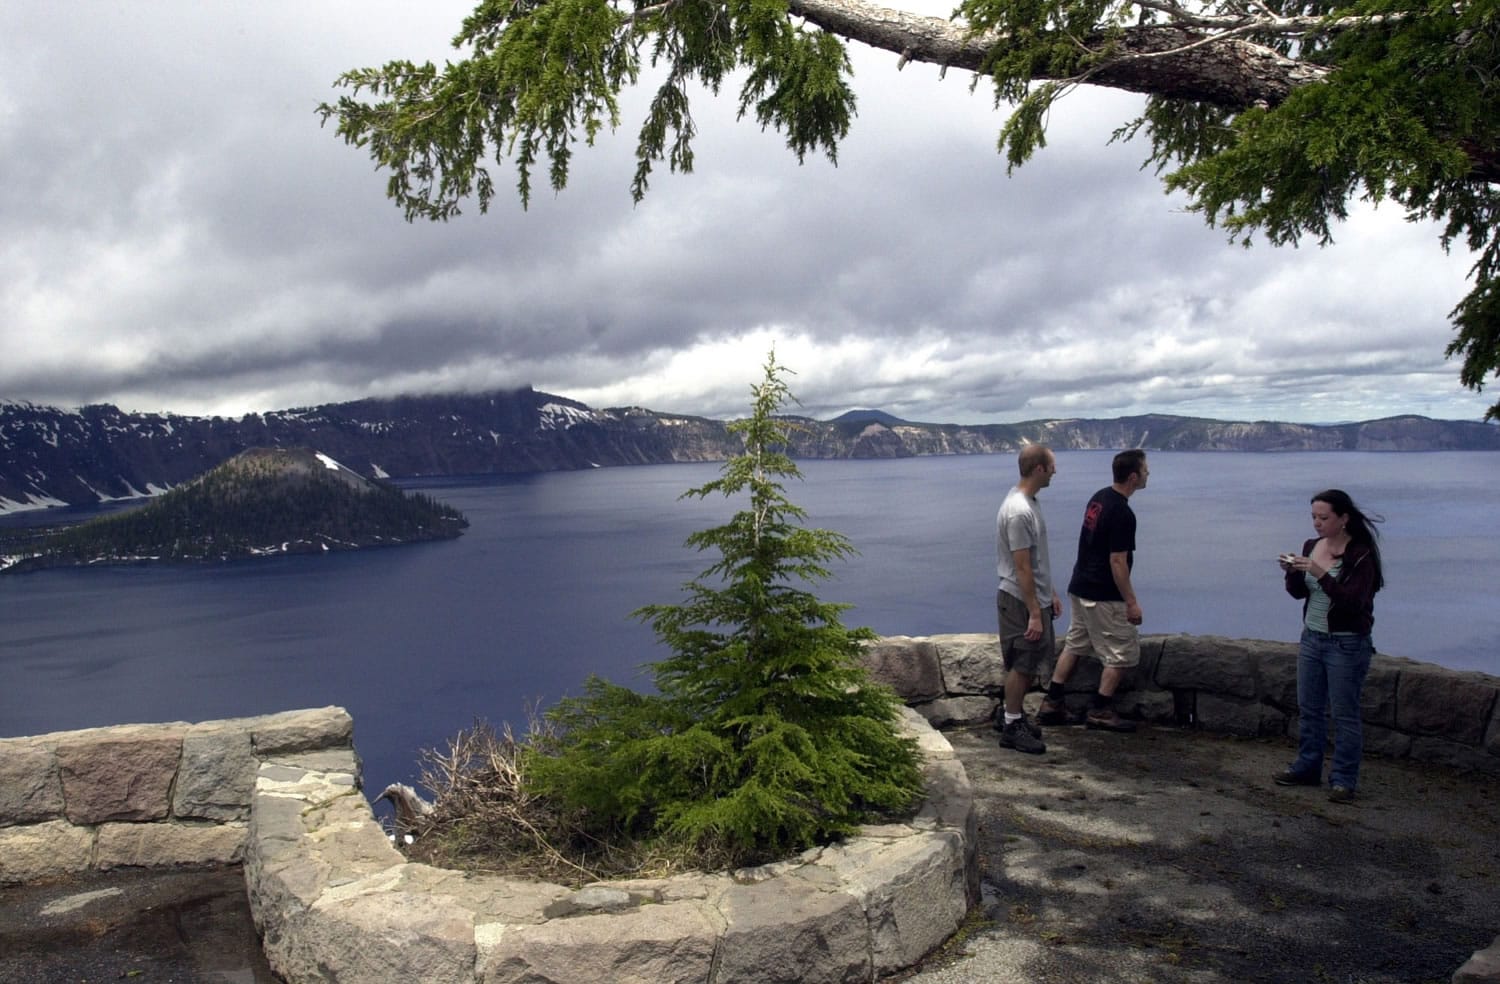 Tourists taking in the view at Crater Lake National Park, Ore.